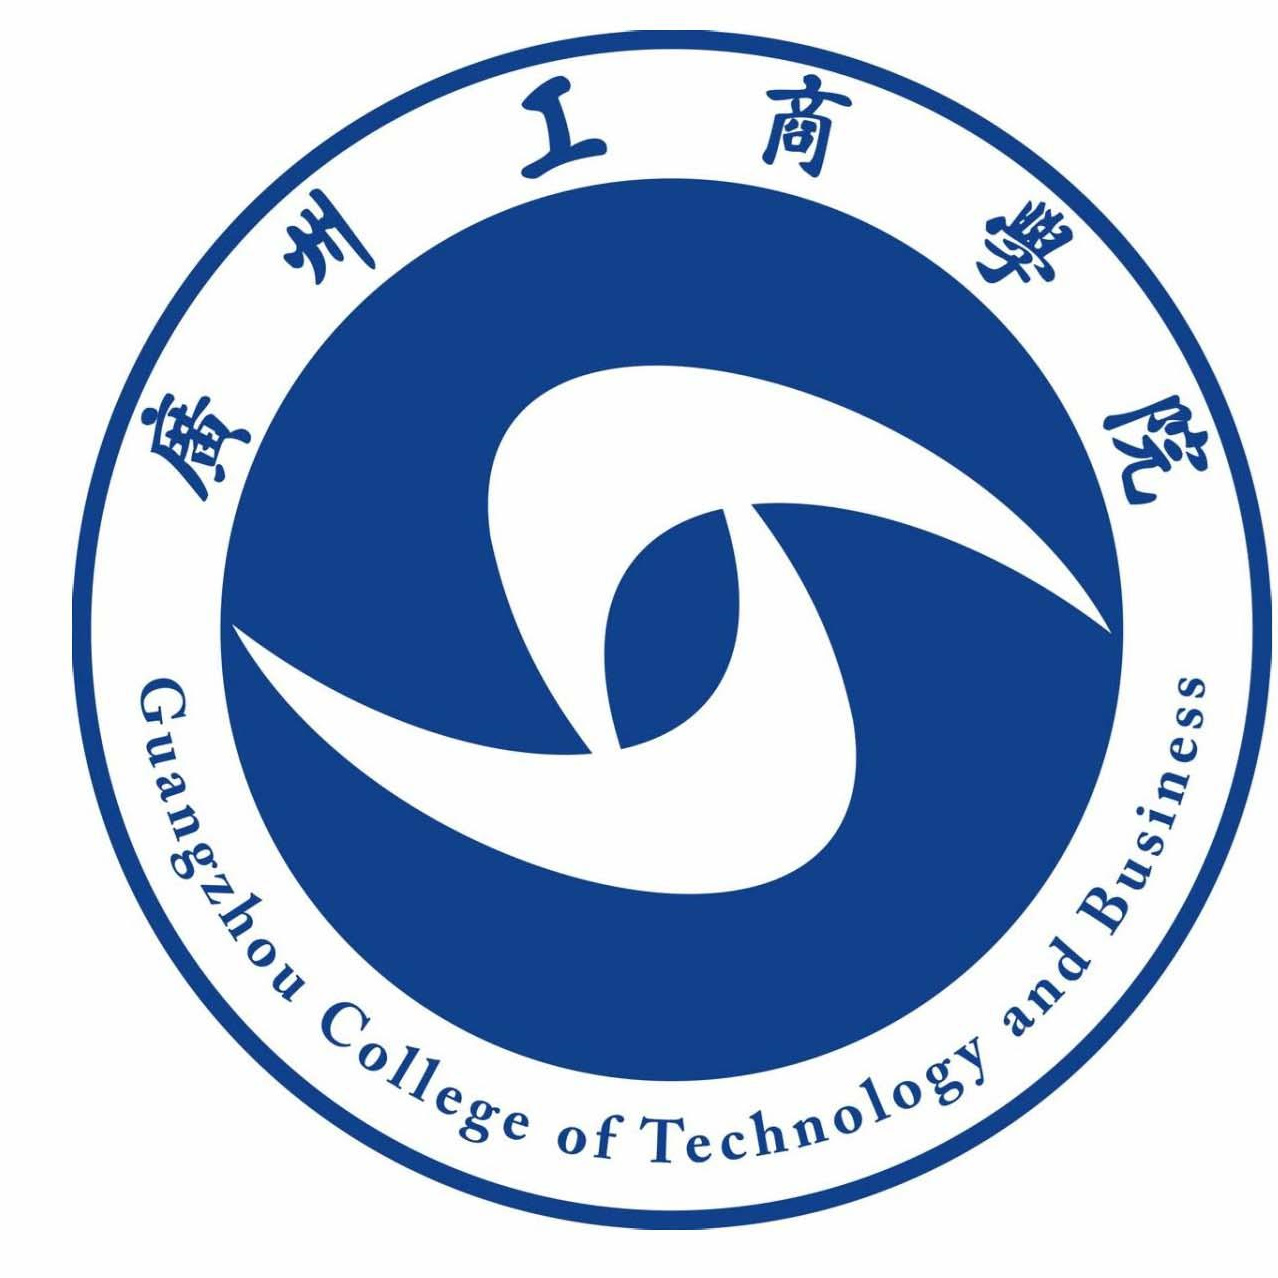 Guangzhou College of Technology and Business